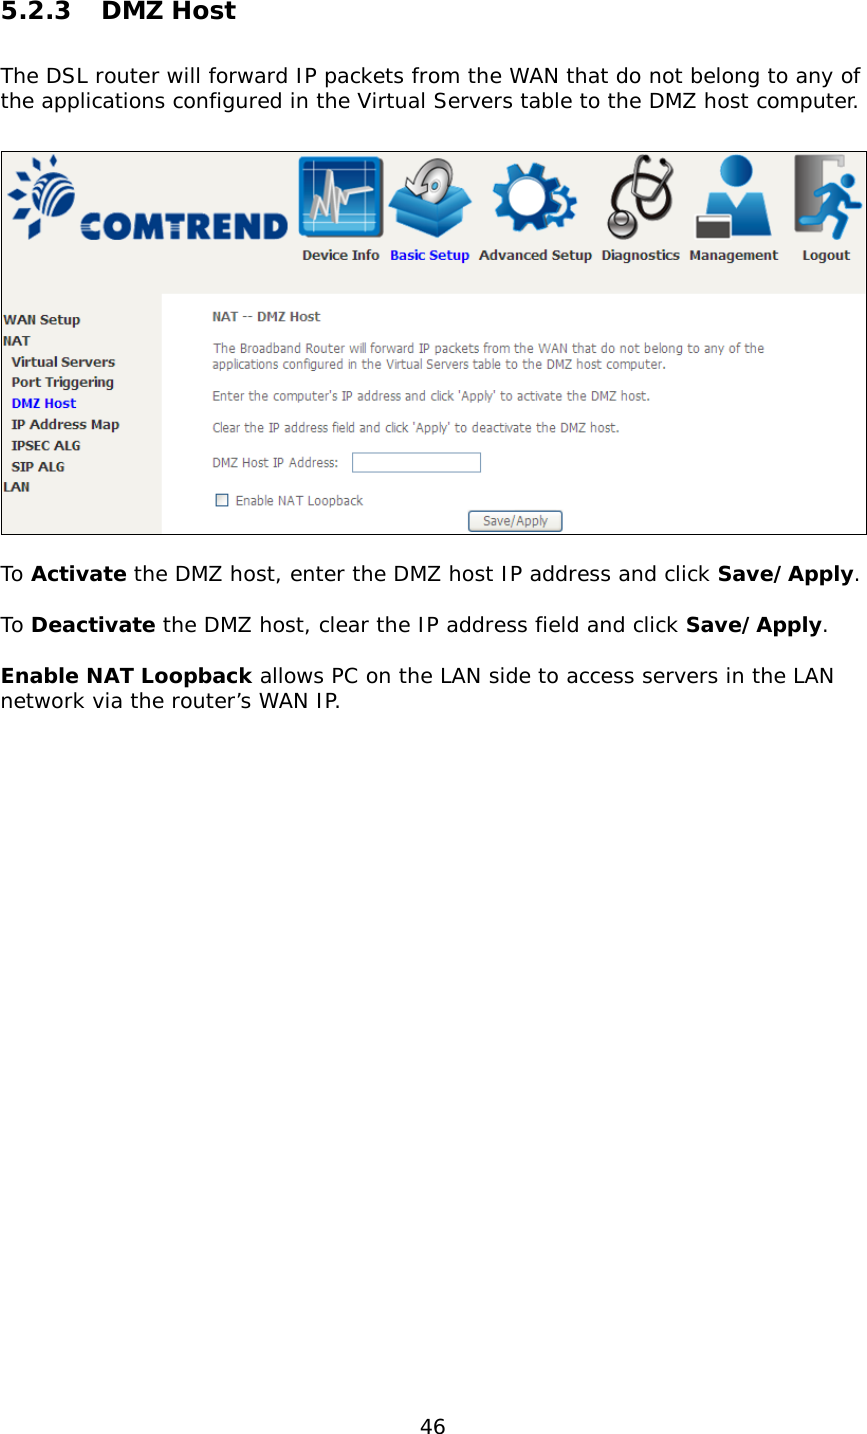  46 5.2.3 DMZ Host The DSL router will forward IP packets from the WAN that do not belong to any of the applications configured in the Virtual Servers table to the DMZ host computer.    To Activate the DMZ host, enter the DMZ host IP address and click Save/Apply.  To Deactivate the DMZ host, clear the IP address field and click Save/Apply.  Enable NAT Loopback allows PC on the LAN side to access servers in the LAN network via the router’s WAN IP. 